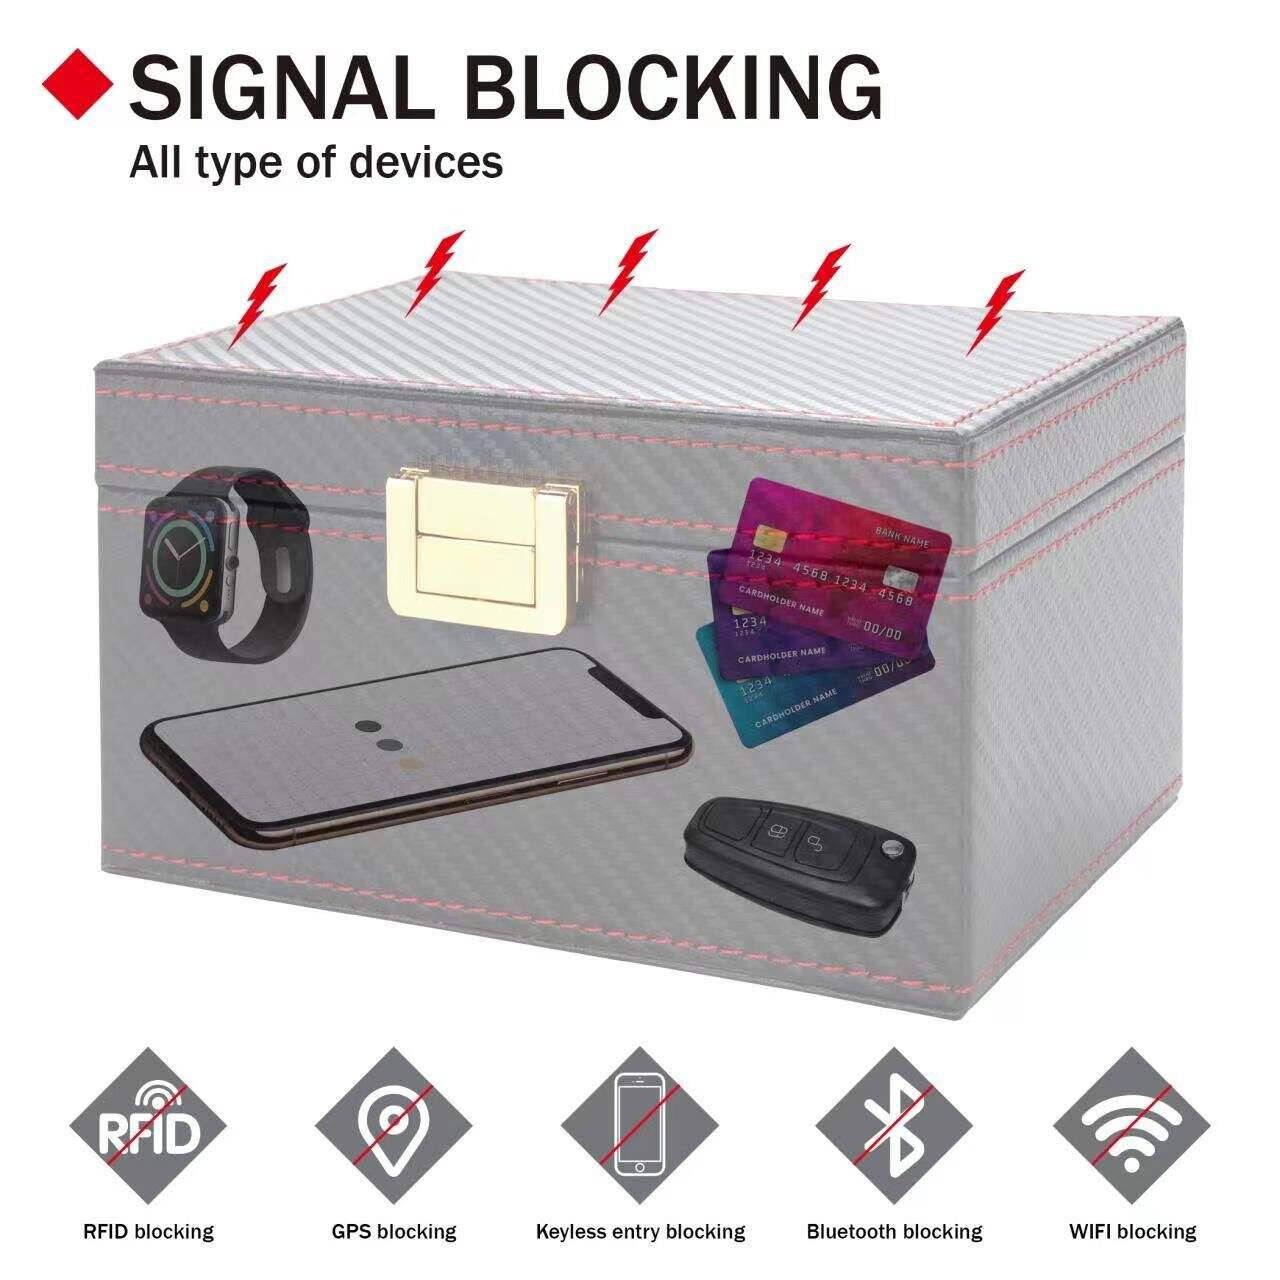 https://media-www.canadiantire.ca/product/automotive/car-care-accessories/auto-accessories/0379851/rfid-signal-blocking-box-large-30e3ff9e-02b6-4cf6-9086-9254b9bd4246-jpgrendition.jpg?imdensity=1&imwidth=1244&impolicy=mZoom